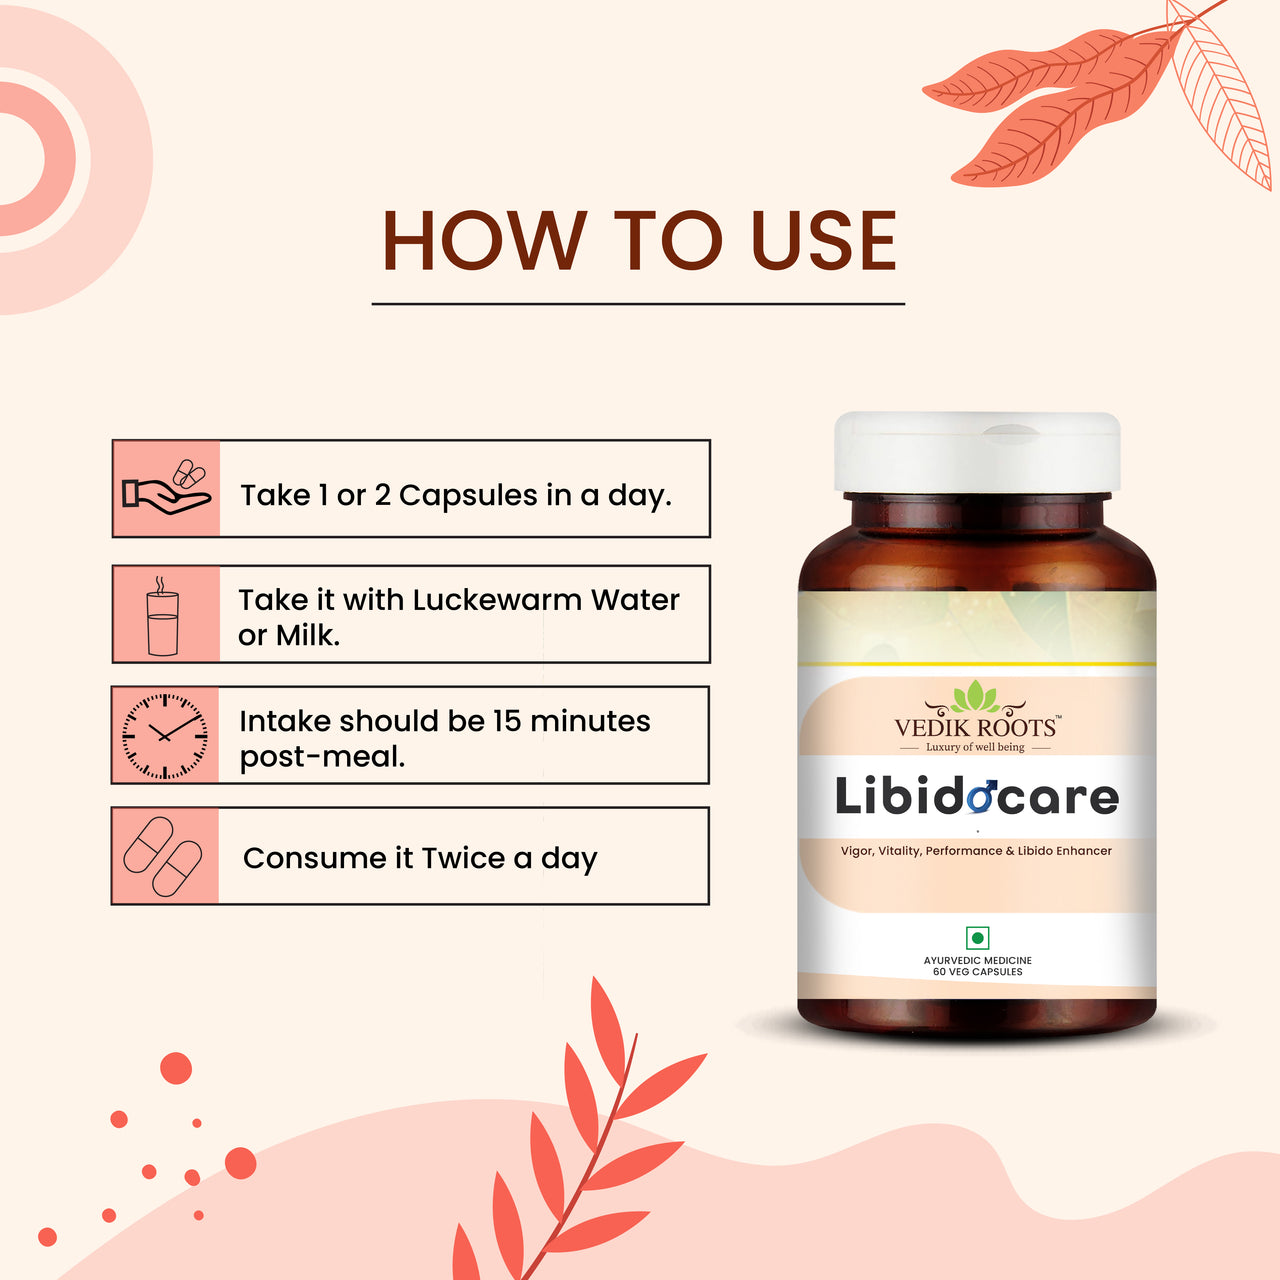 How to use Vedikroots Libidocare